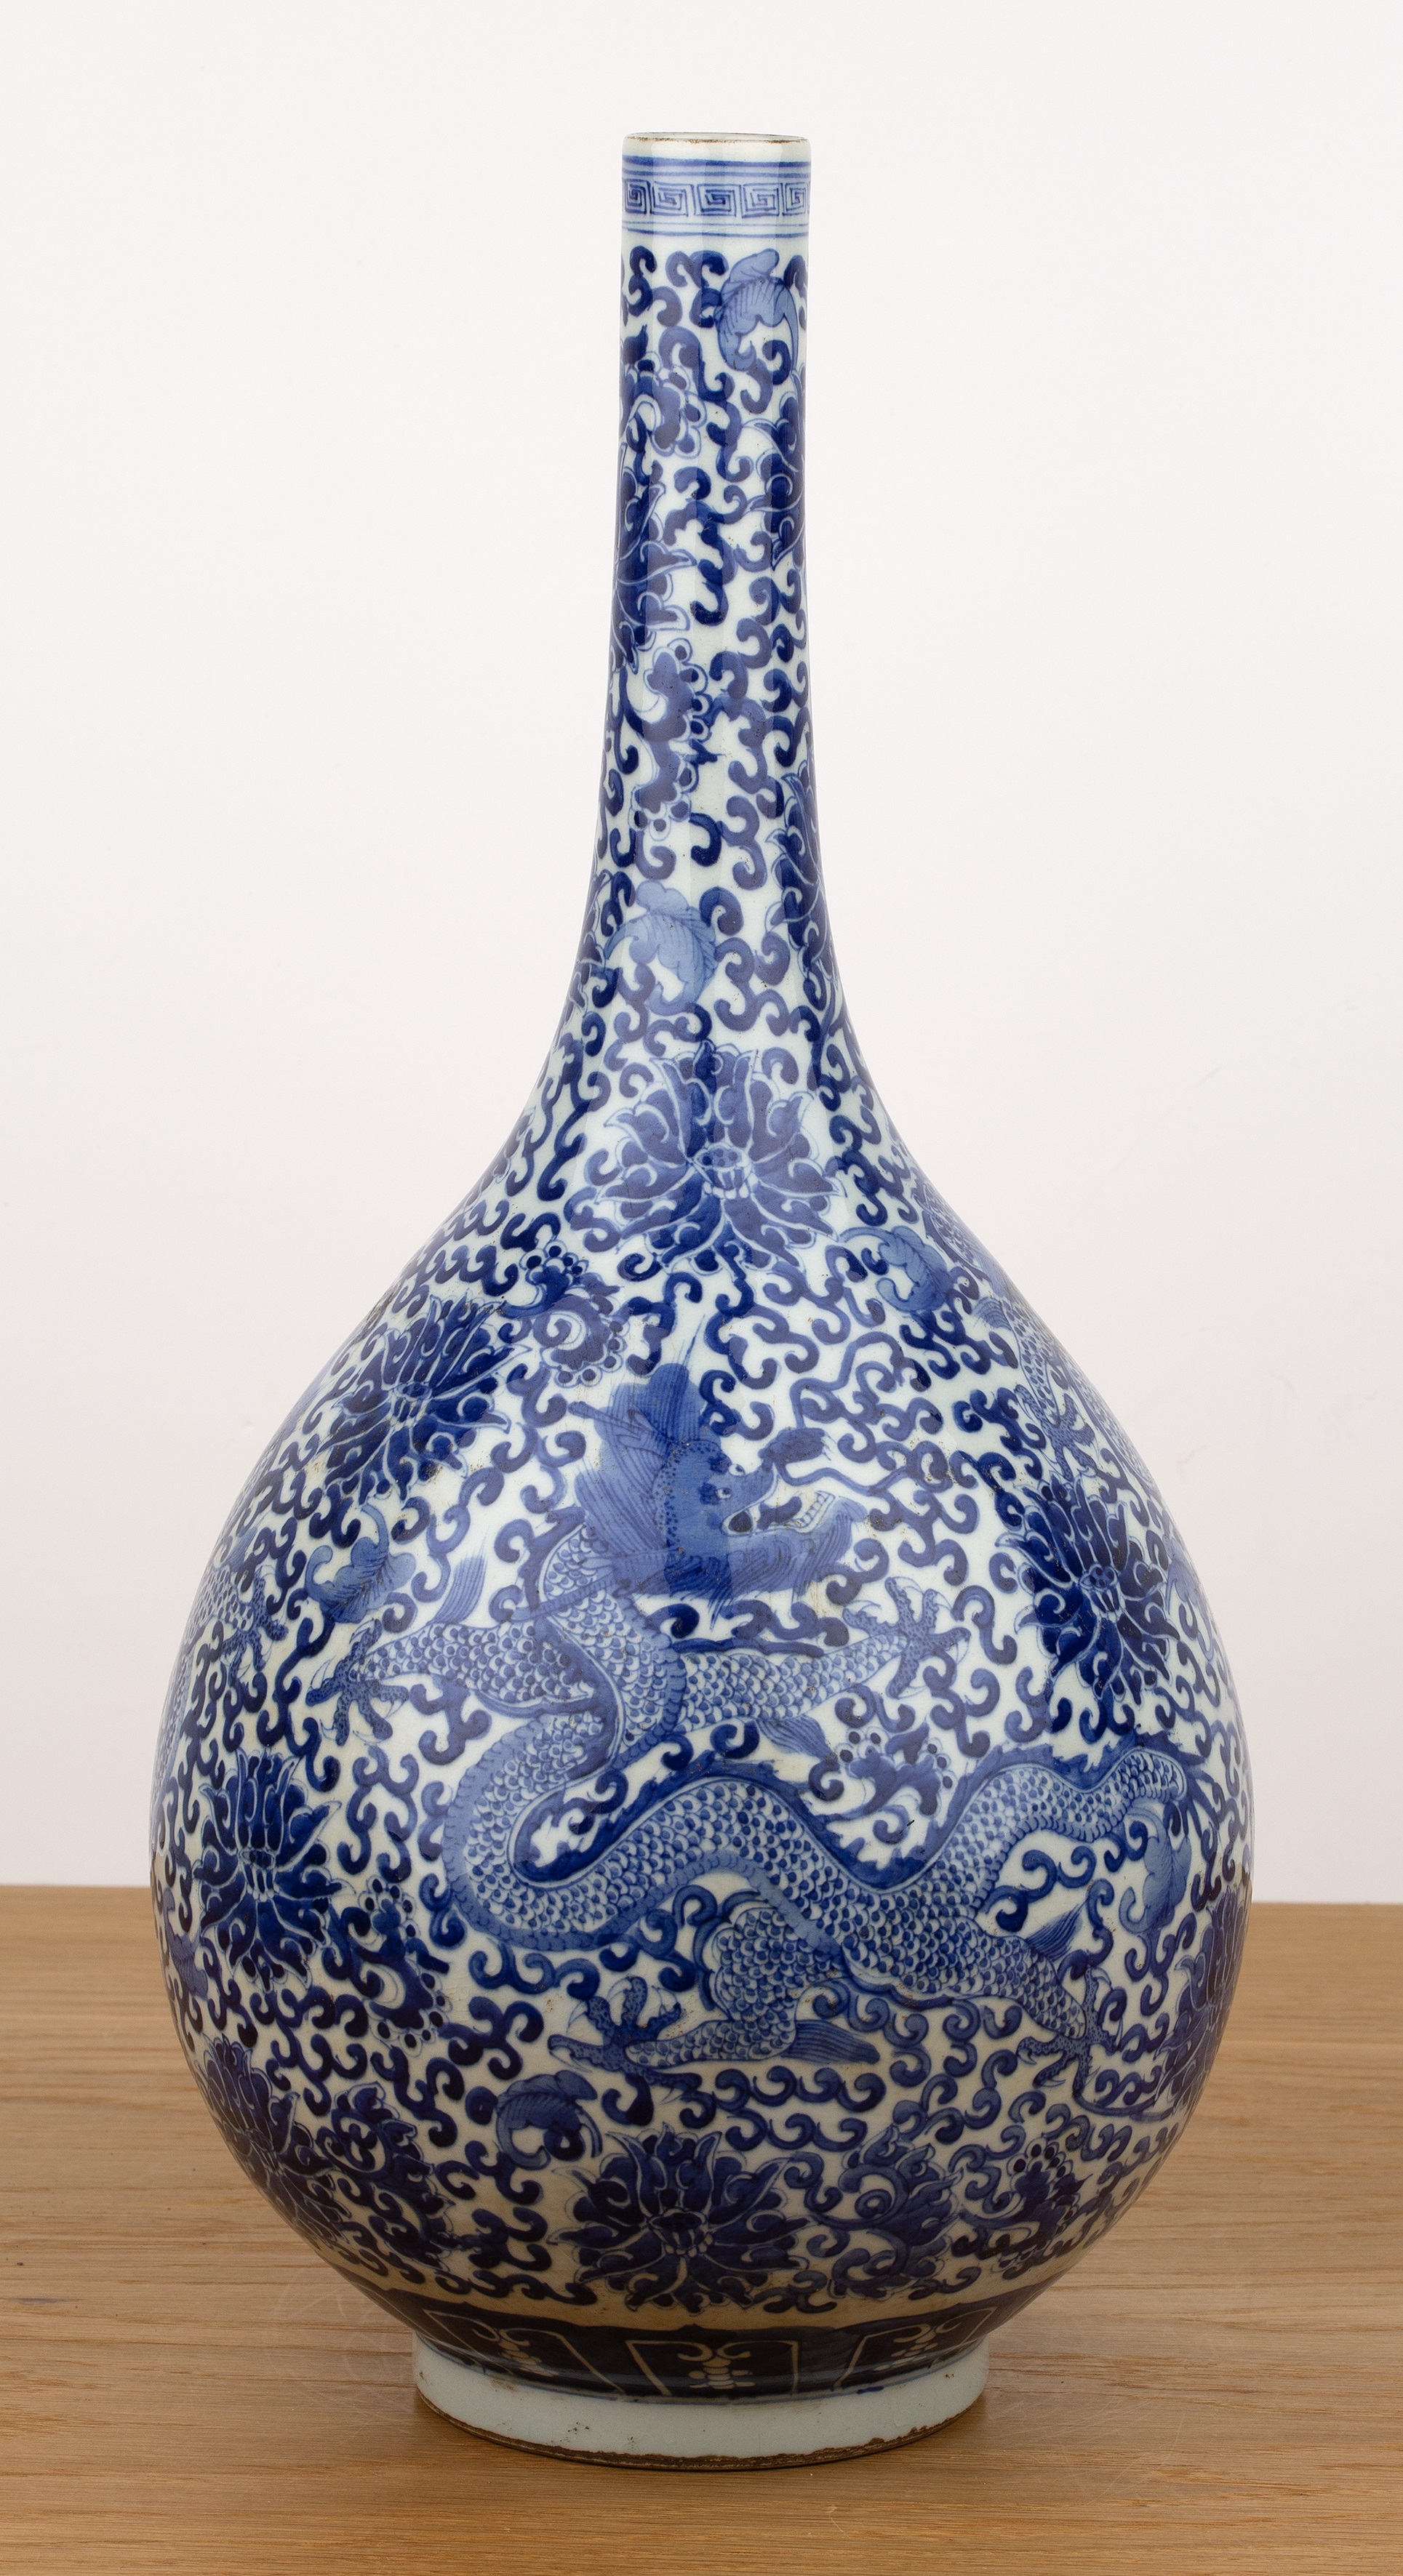 Blue and white porcelain bottle vase Chinese, early 20th Century painted with trailing dragons and - Image 2 of 5